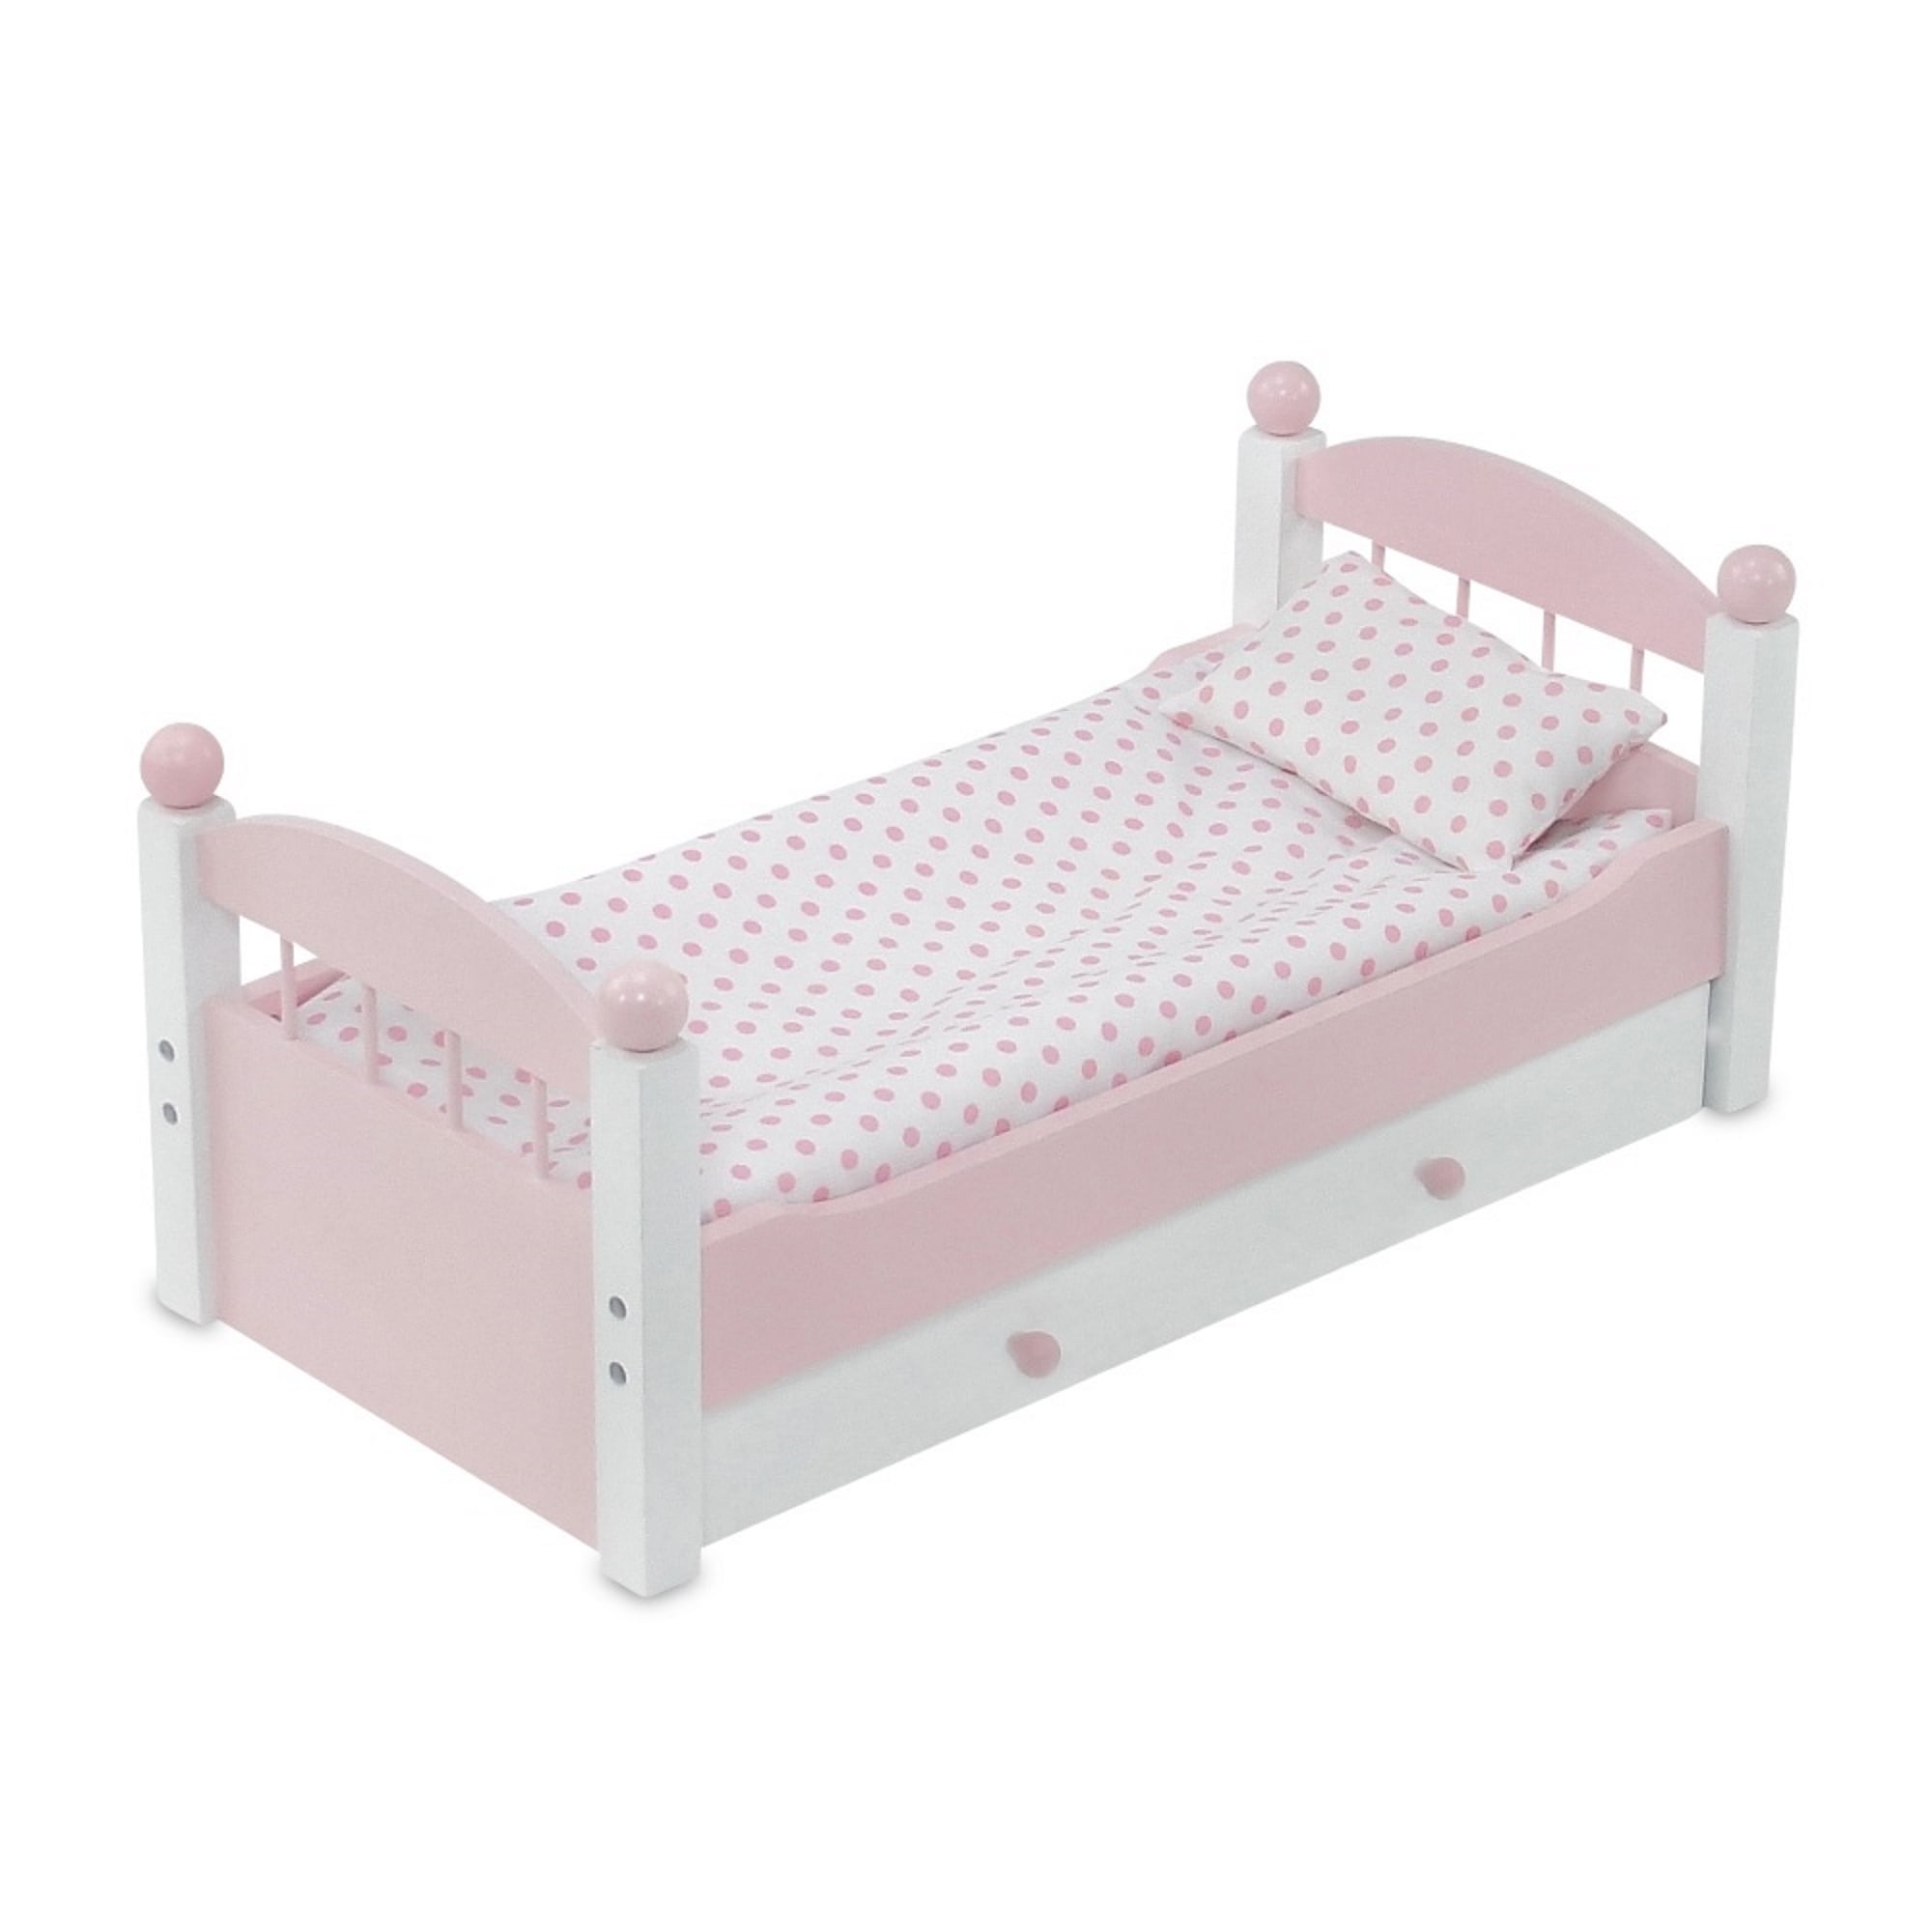 Inch doll bed